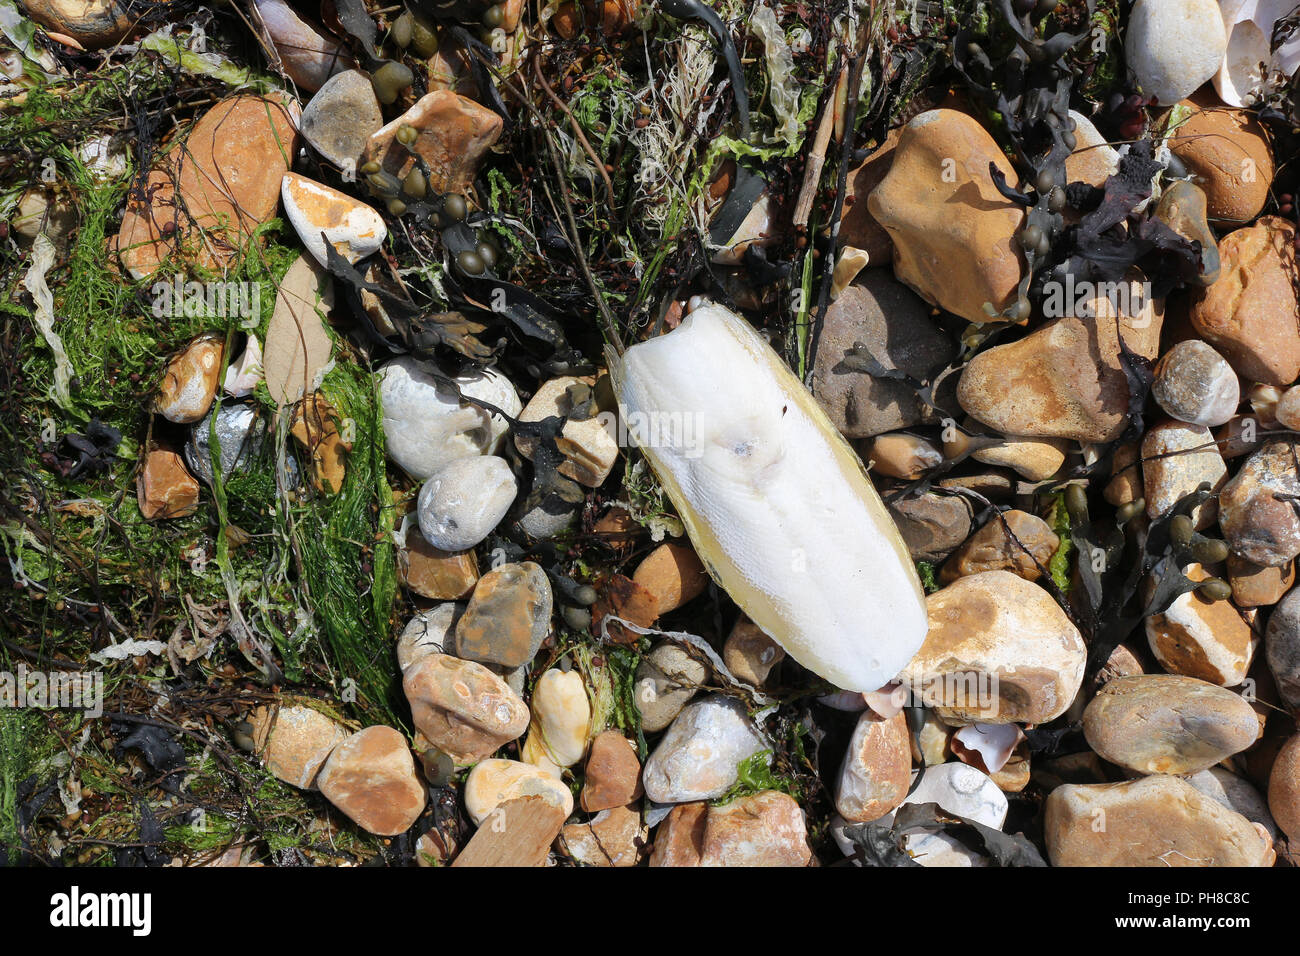 A cuttlefish bone or cuttlebone with pebbles and seaweed on the beach Stock Photo